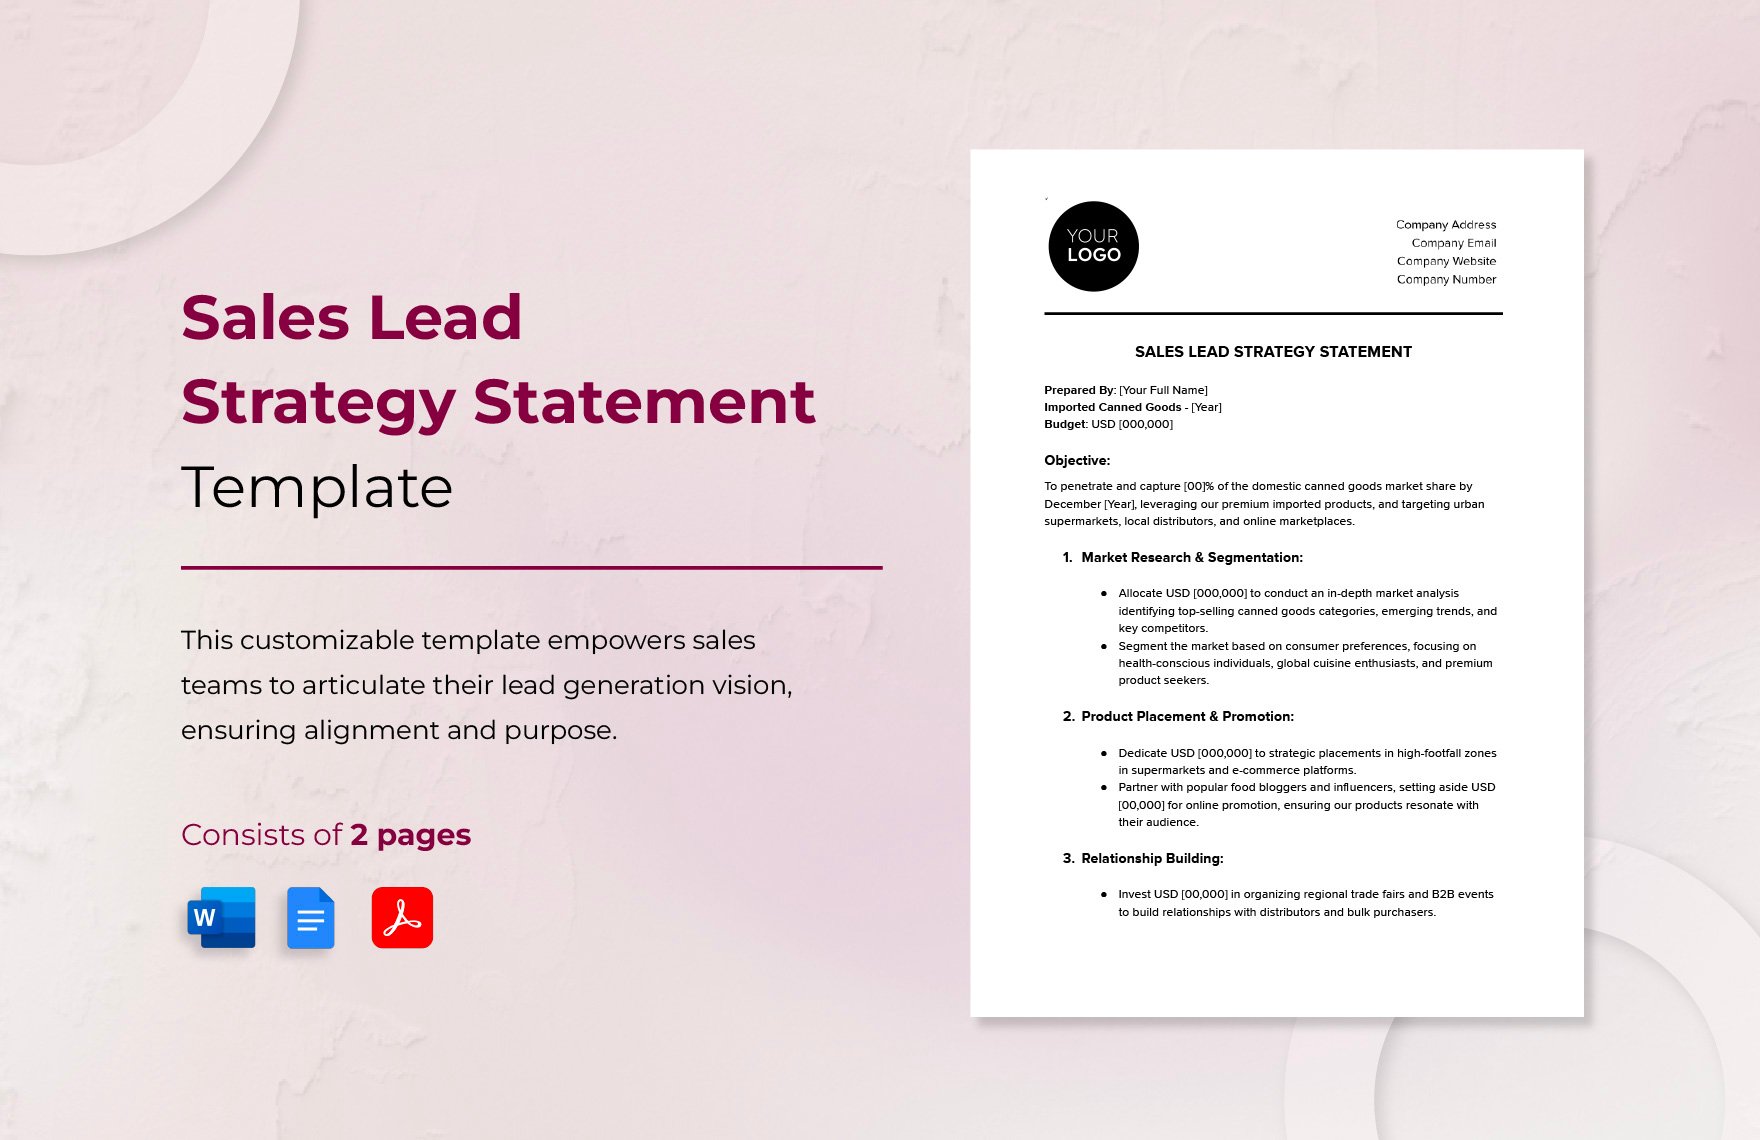 Sales Lead Strategy Statement Template in Word, Google Docs, PDF